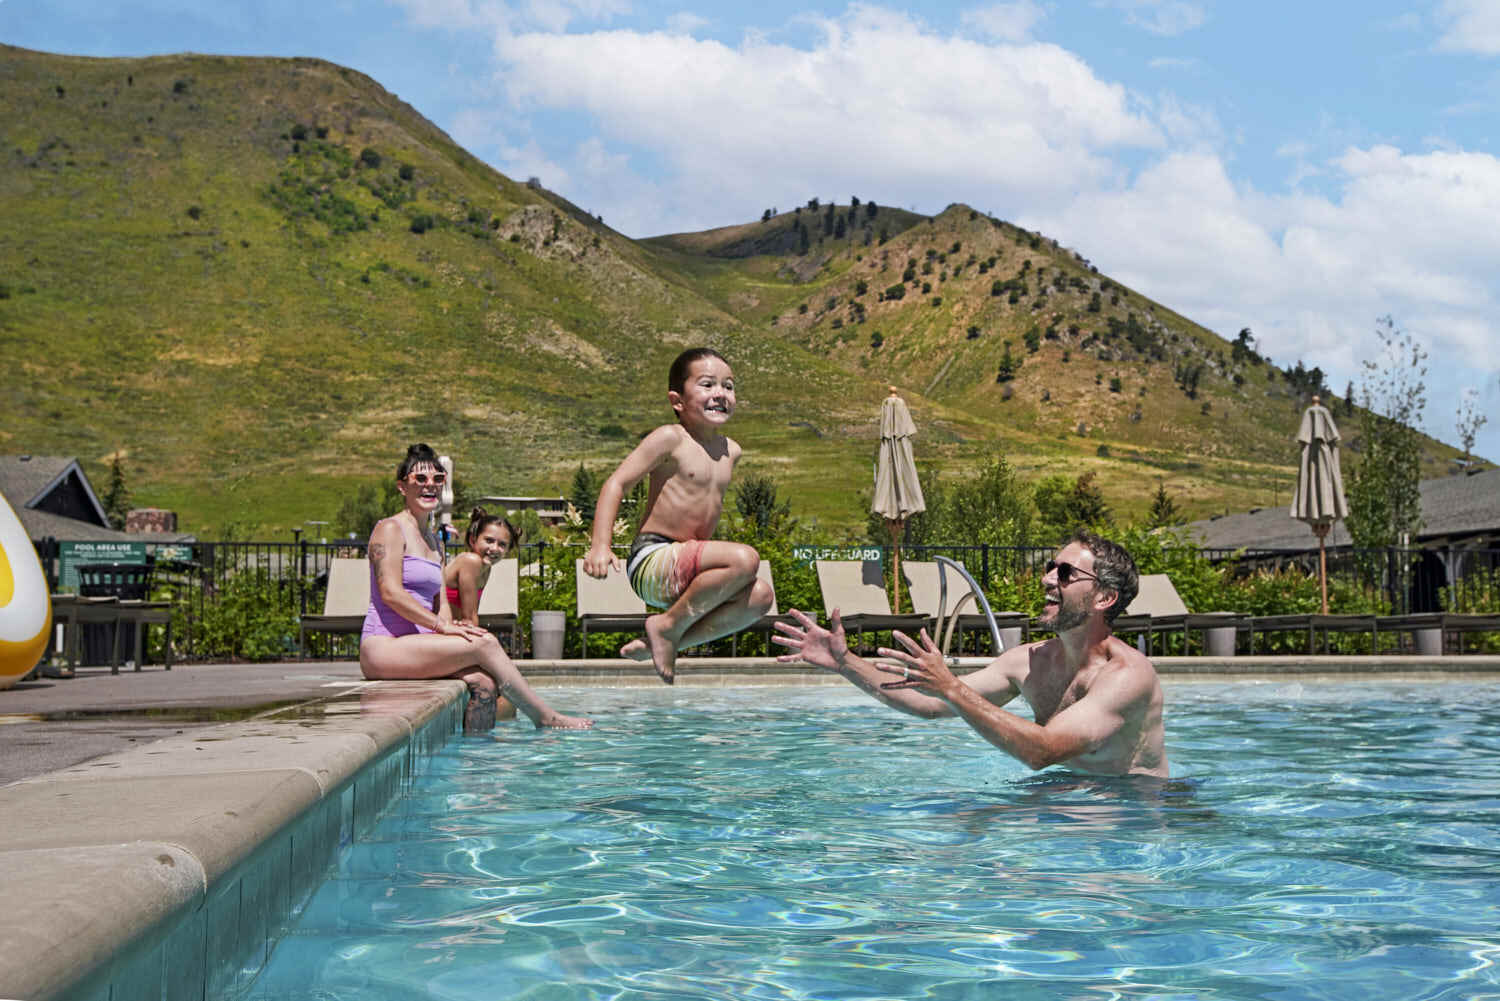 Family enjoys memorable moments in the pool, embracing a delightful view of lush green mountains.